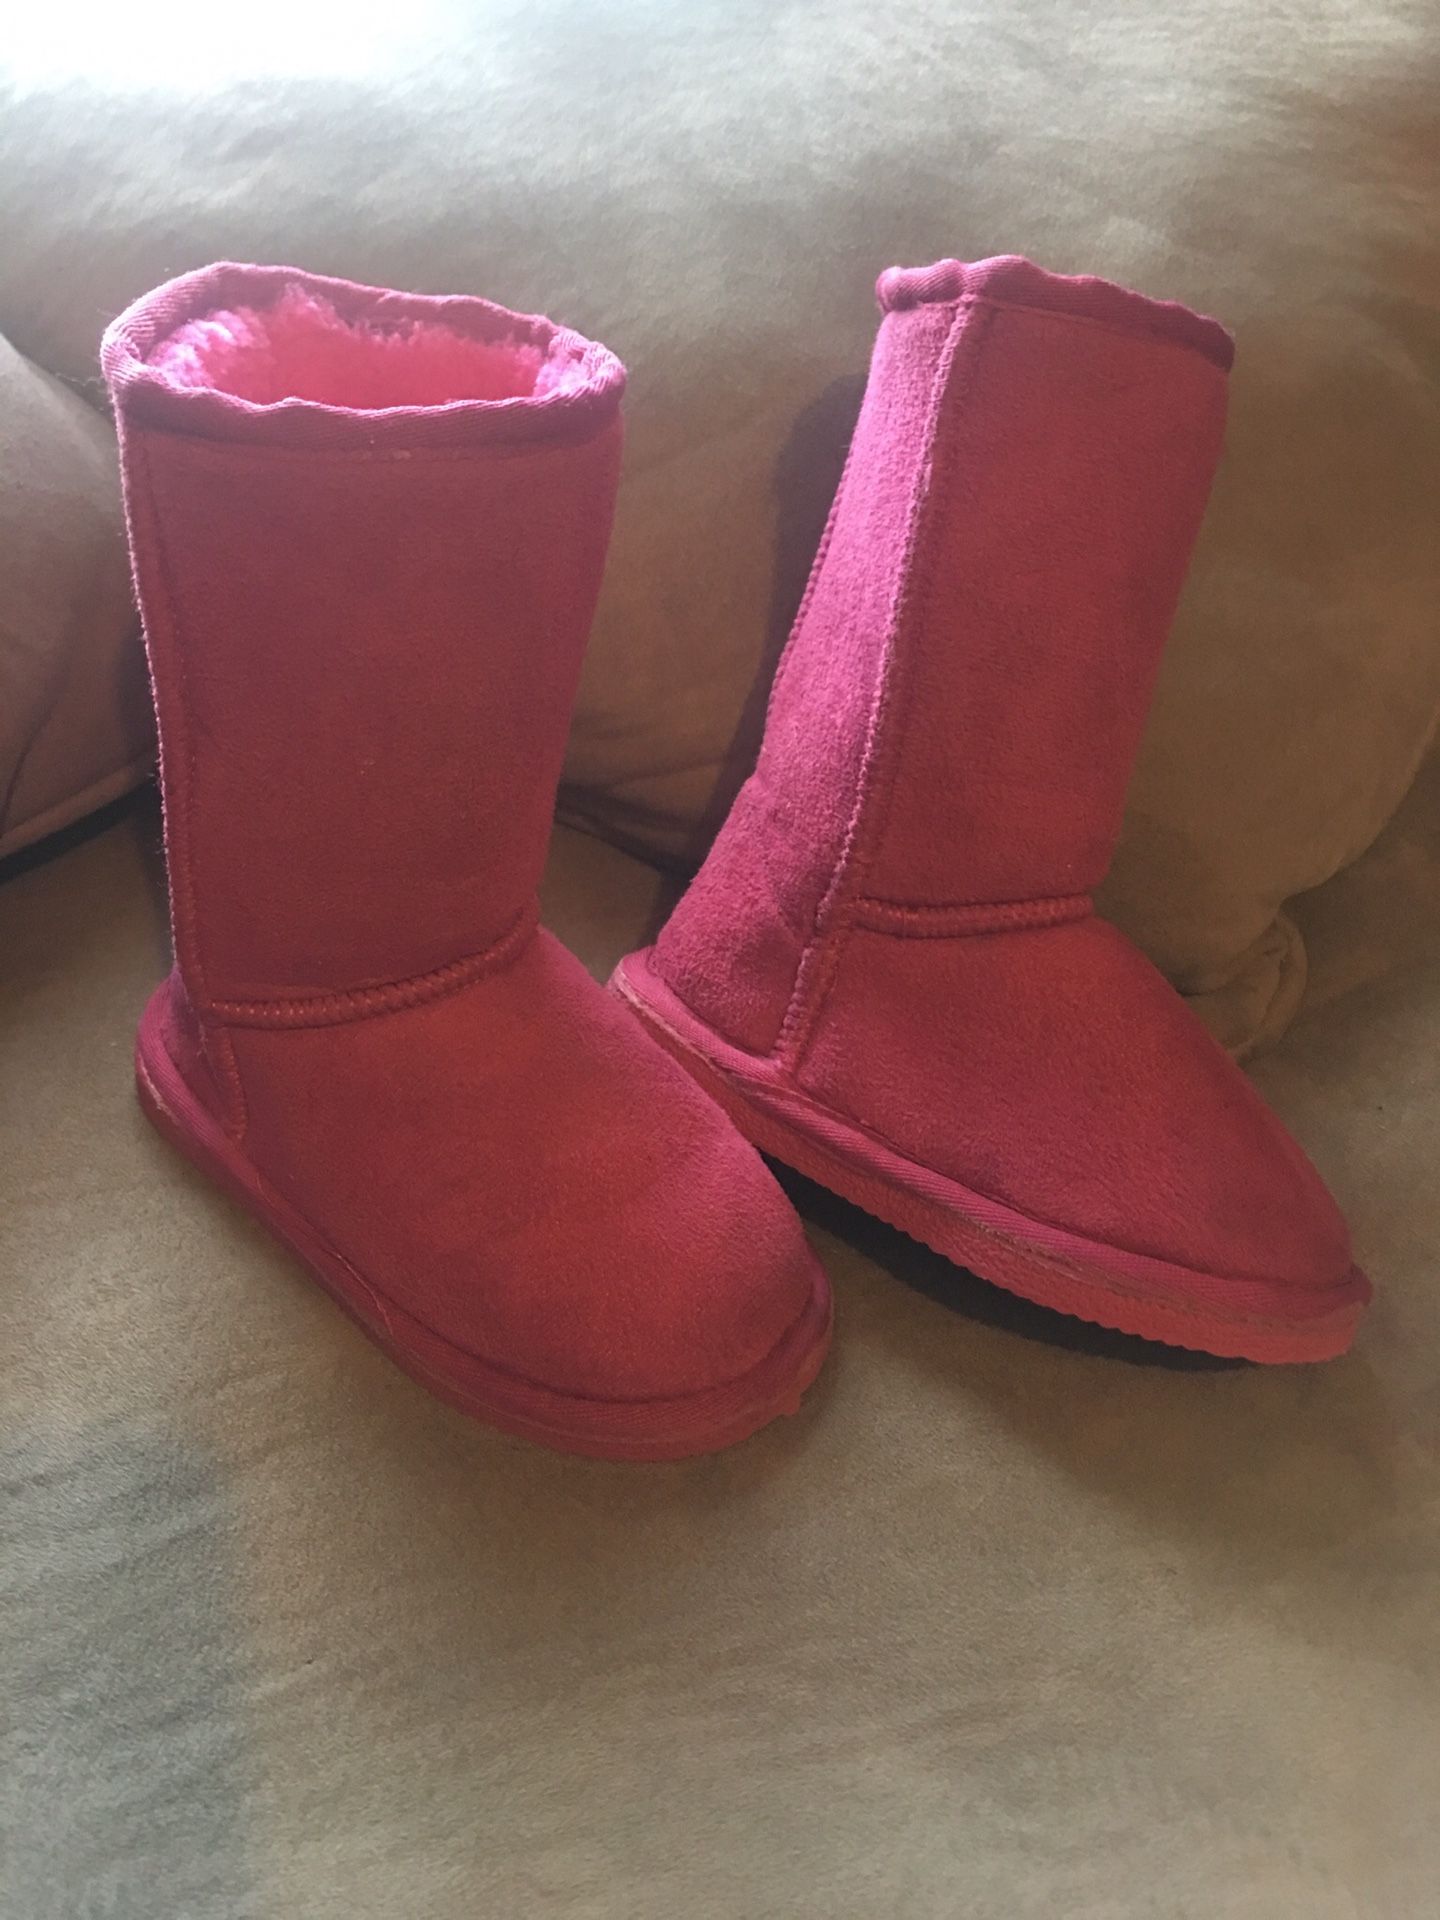 Toddler girls pink boots size 10